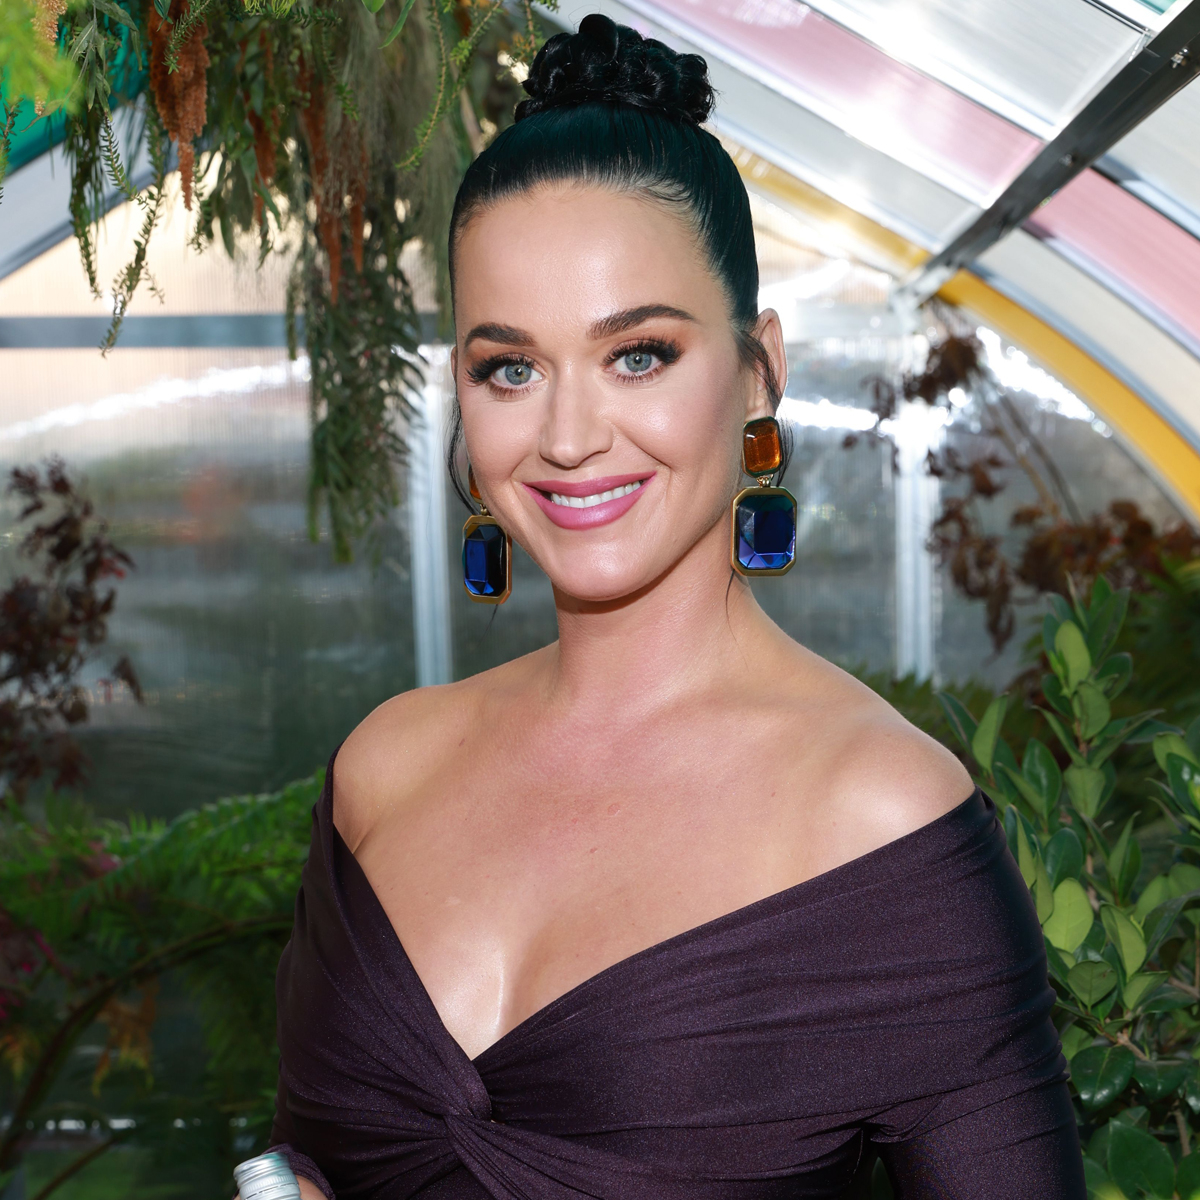 Is Katy Perry Ready for Retirement? She Says…